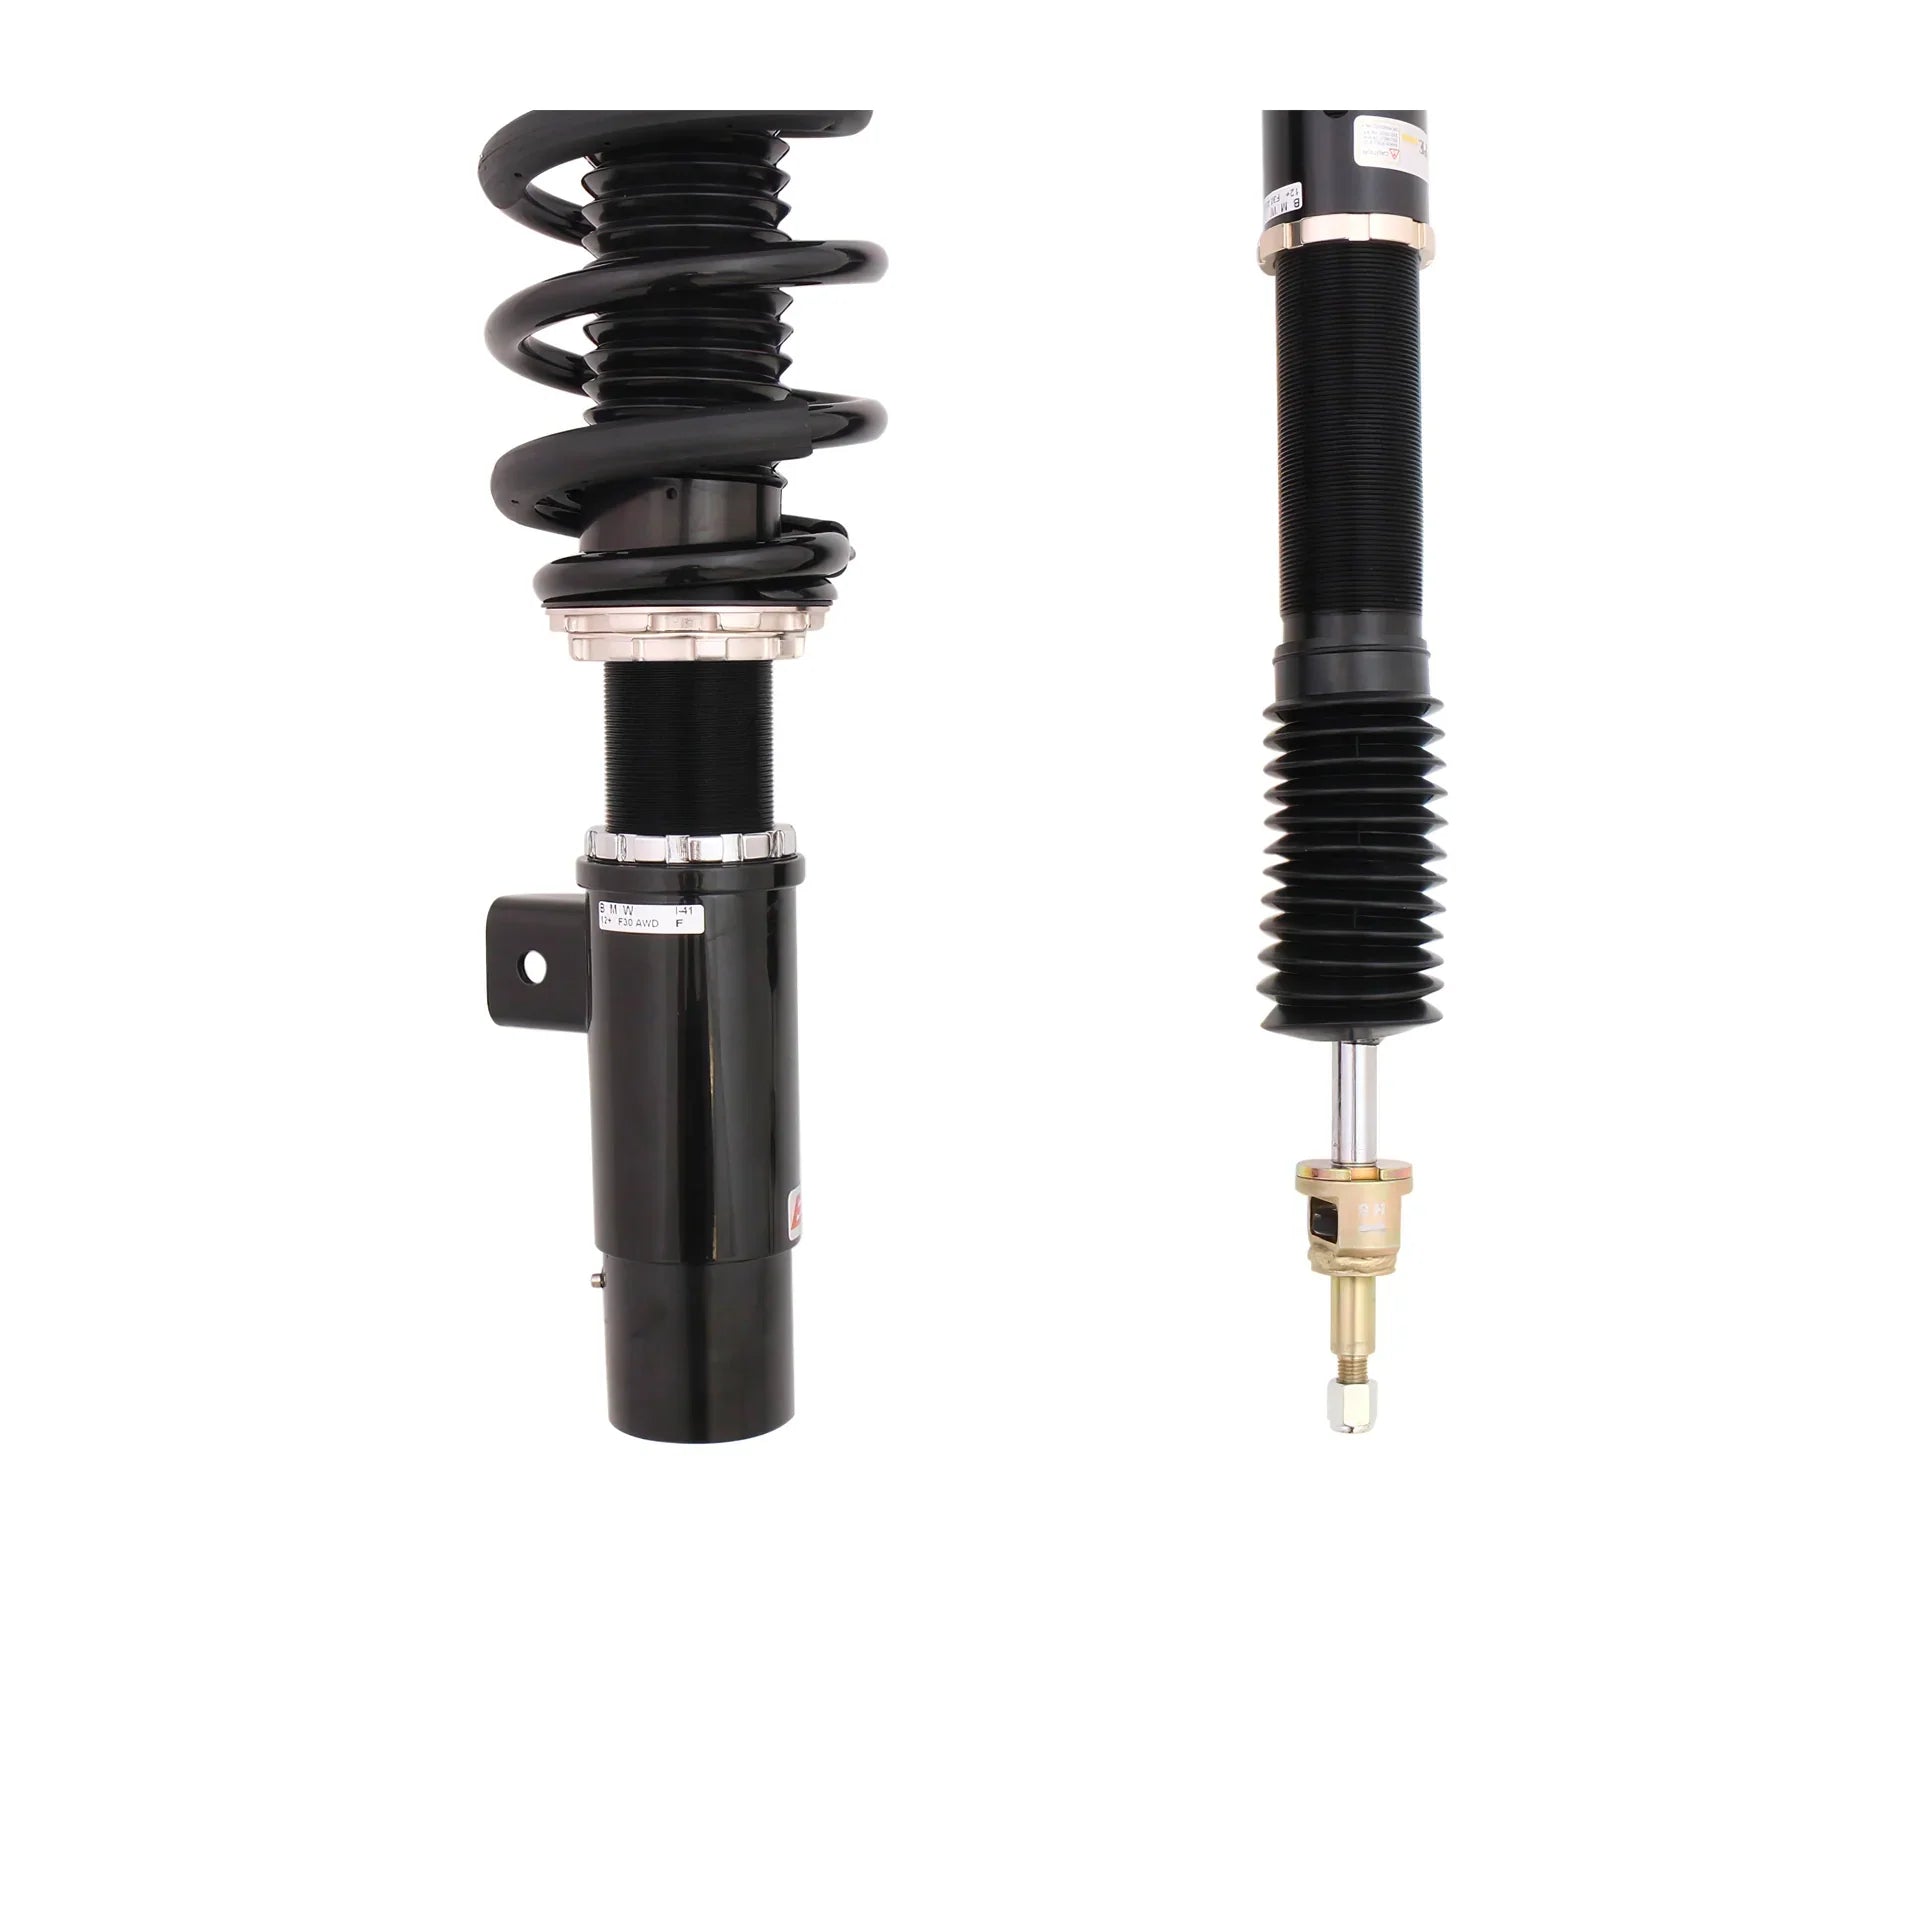 BC Racing - BR Series Coilovers - 3-Bolt Top Mounts - I-41-BR